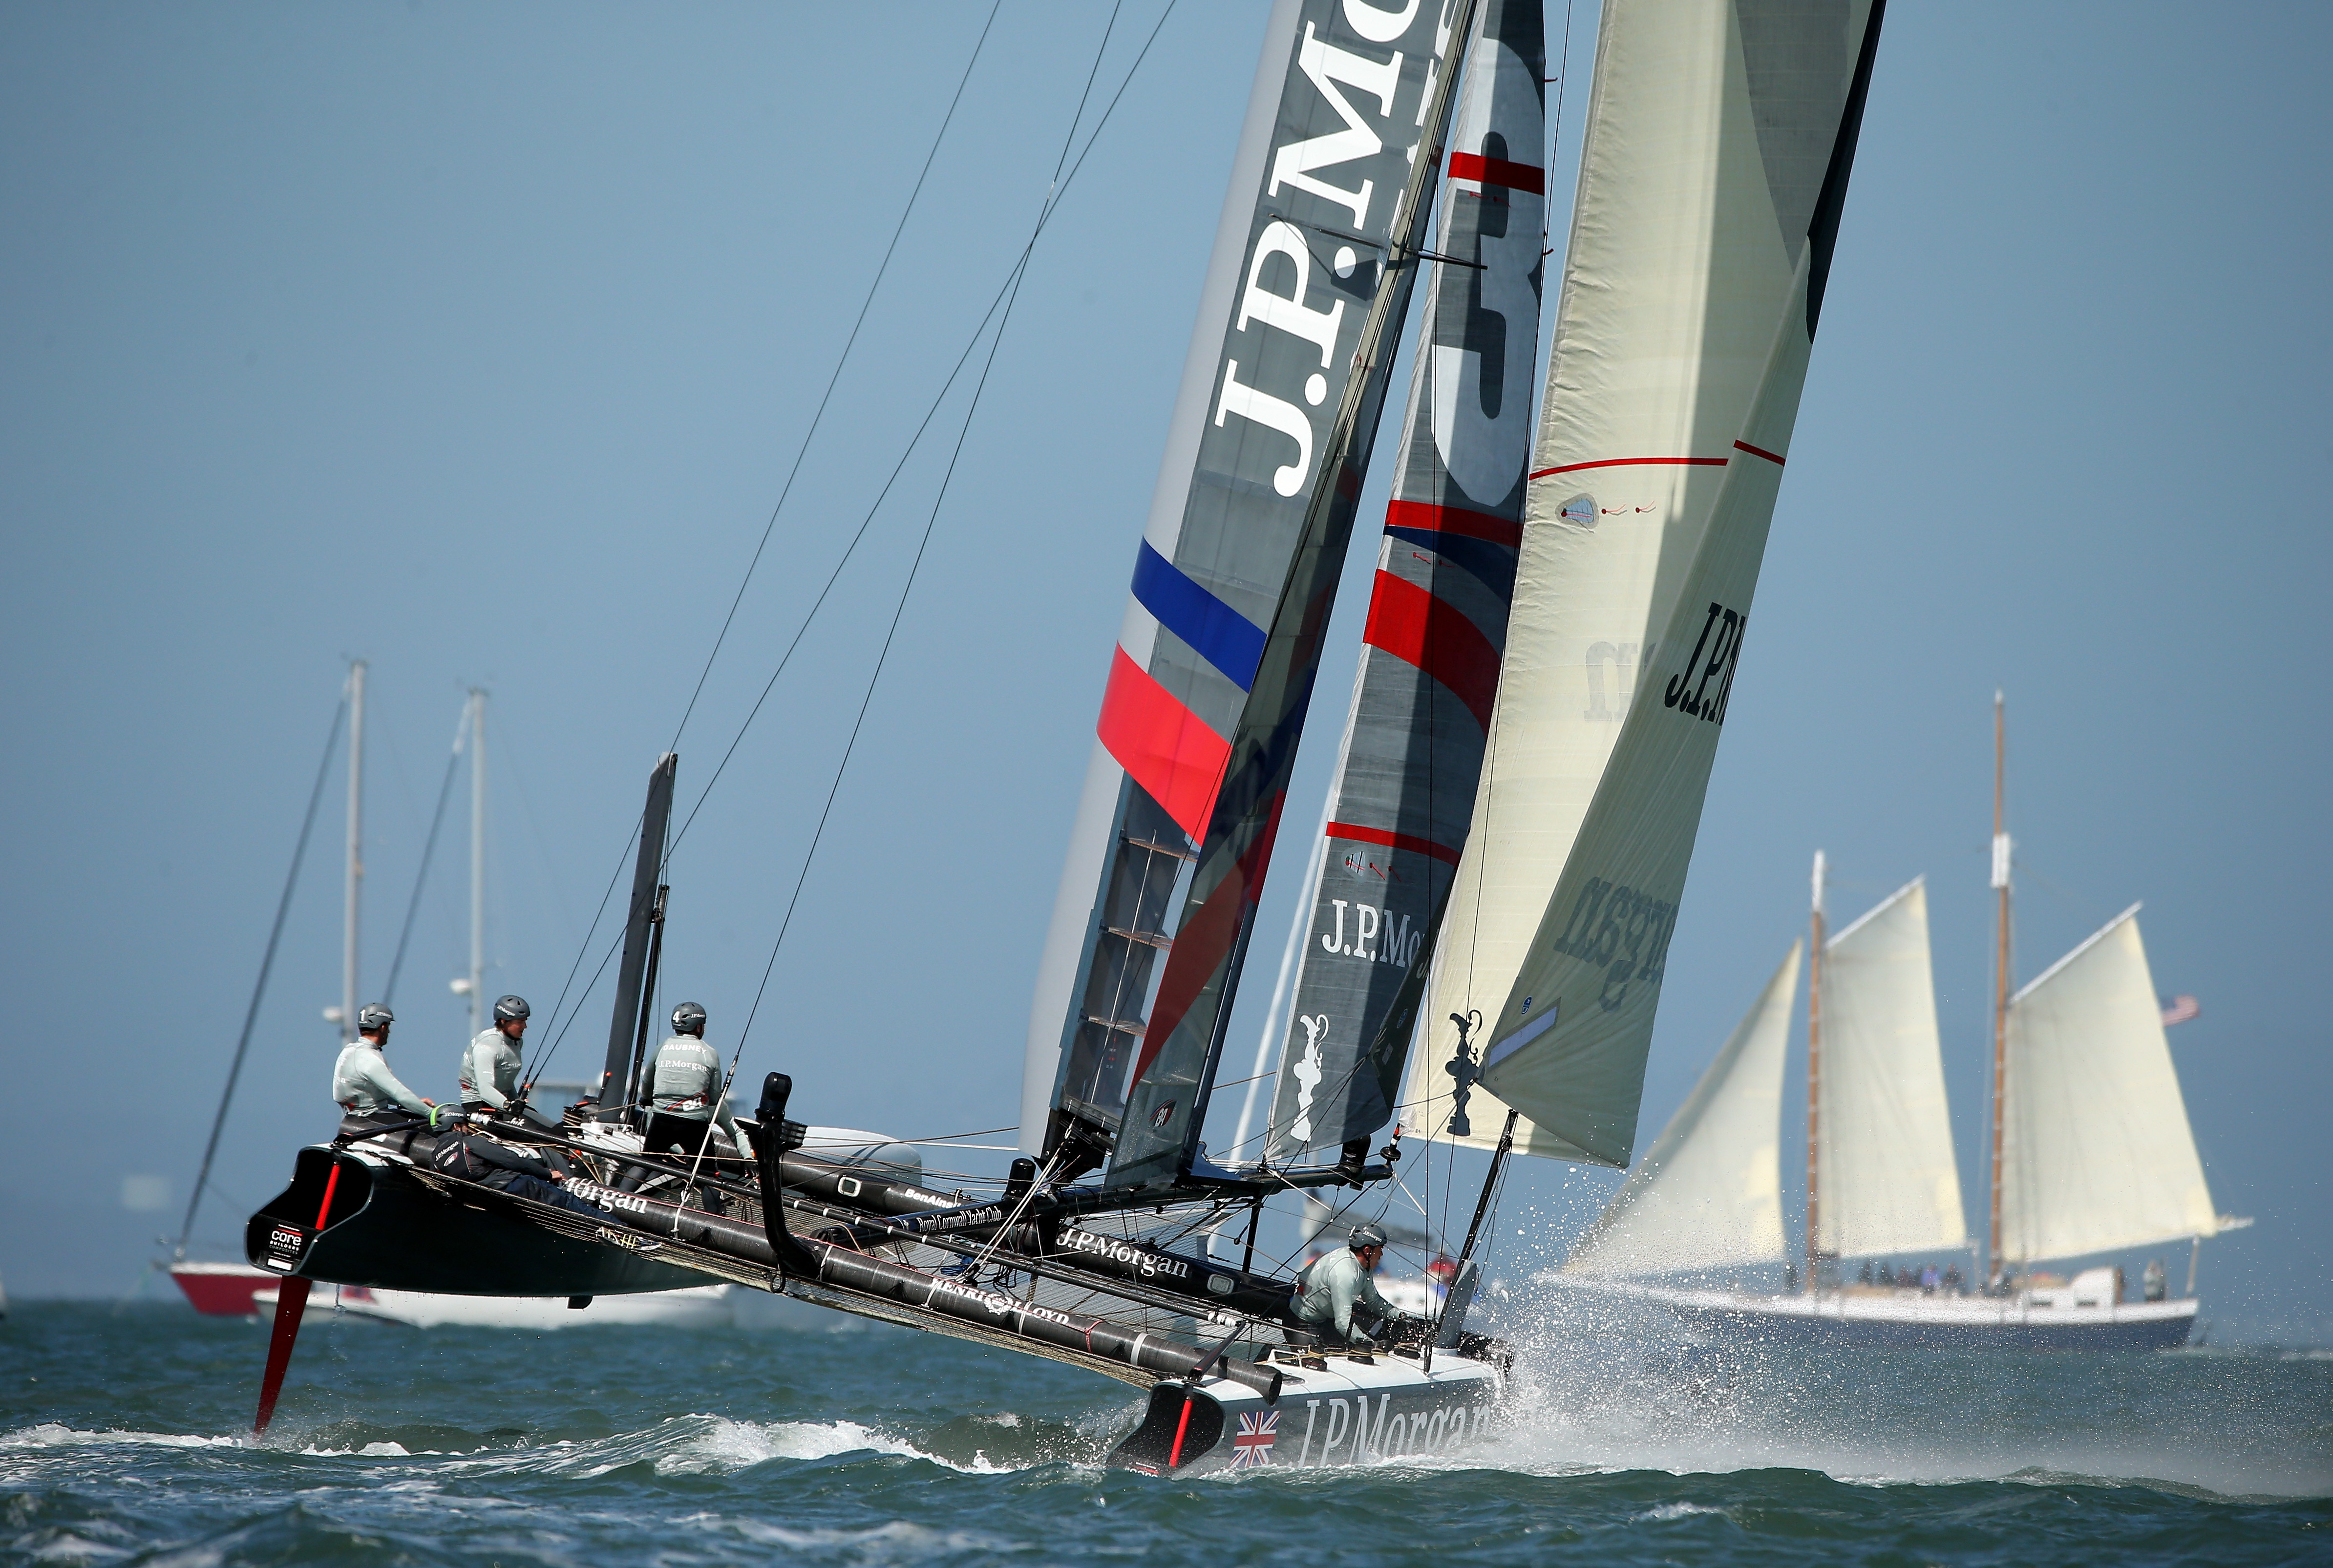 J.P. Morgan BAR team skippered by Ben Ainslie competes in a match race during the America's Cup World Series on August 24, 2012 in San Francisco, California. (credit: Ezra Shaw/Getty Images)